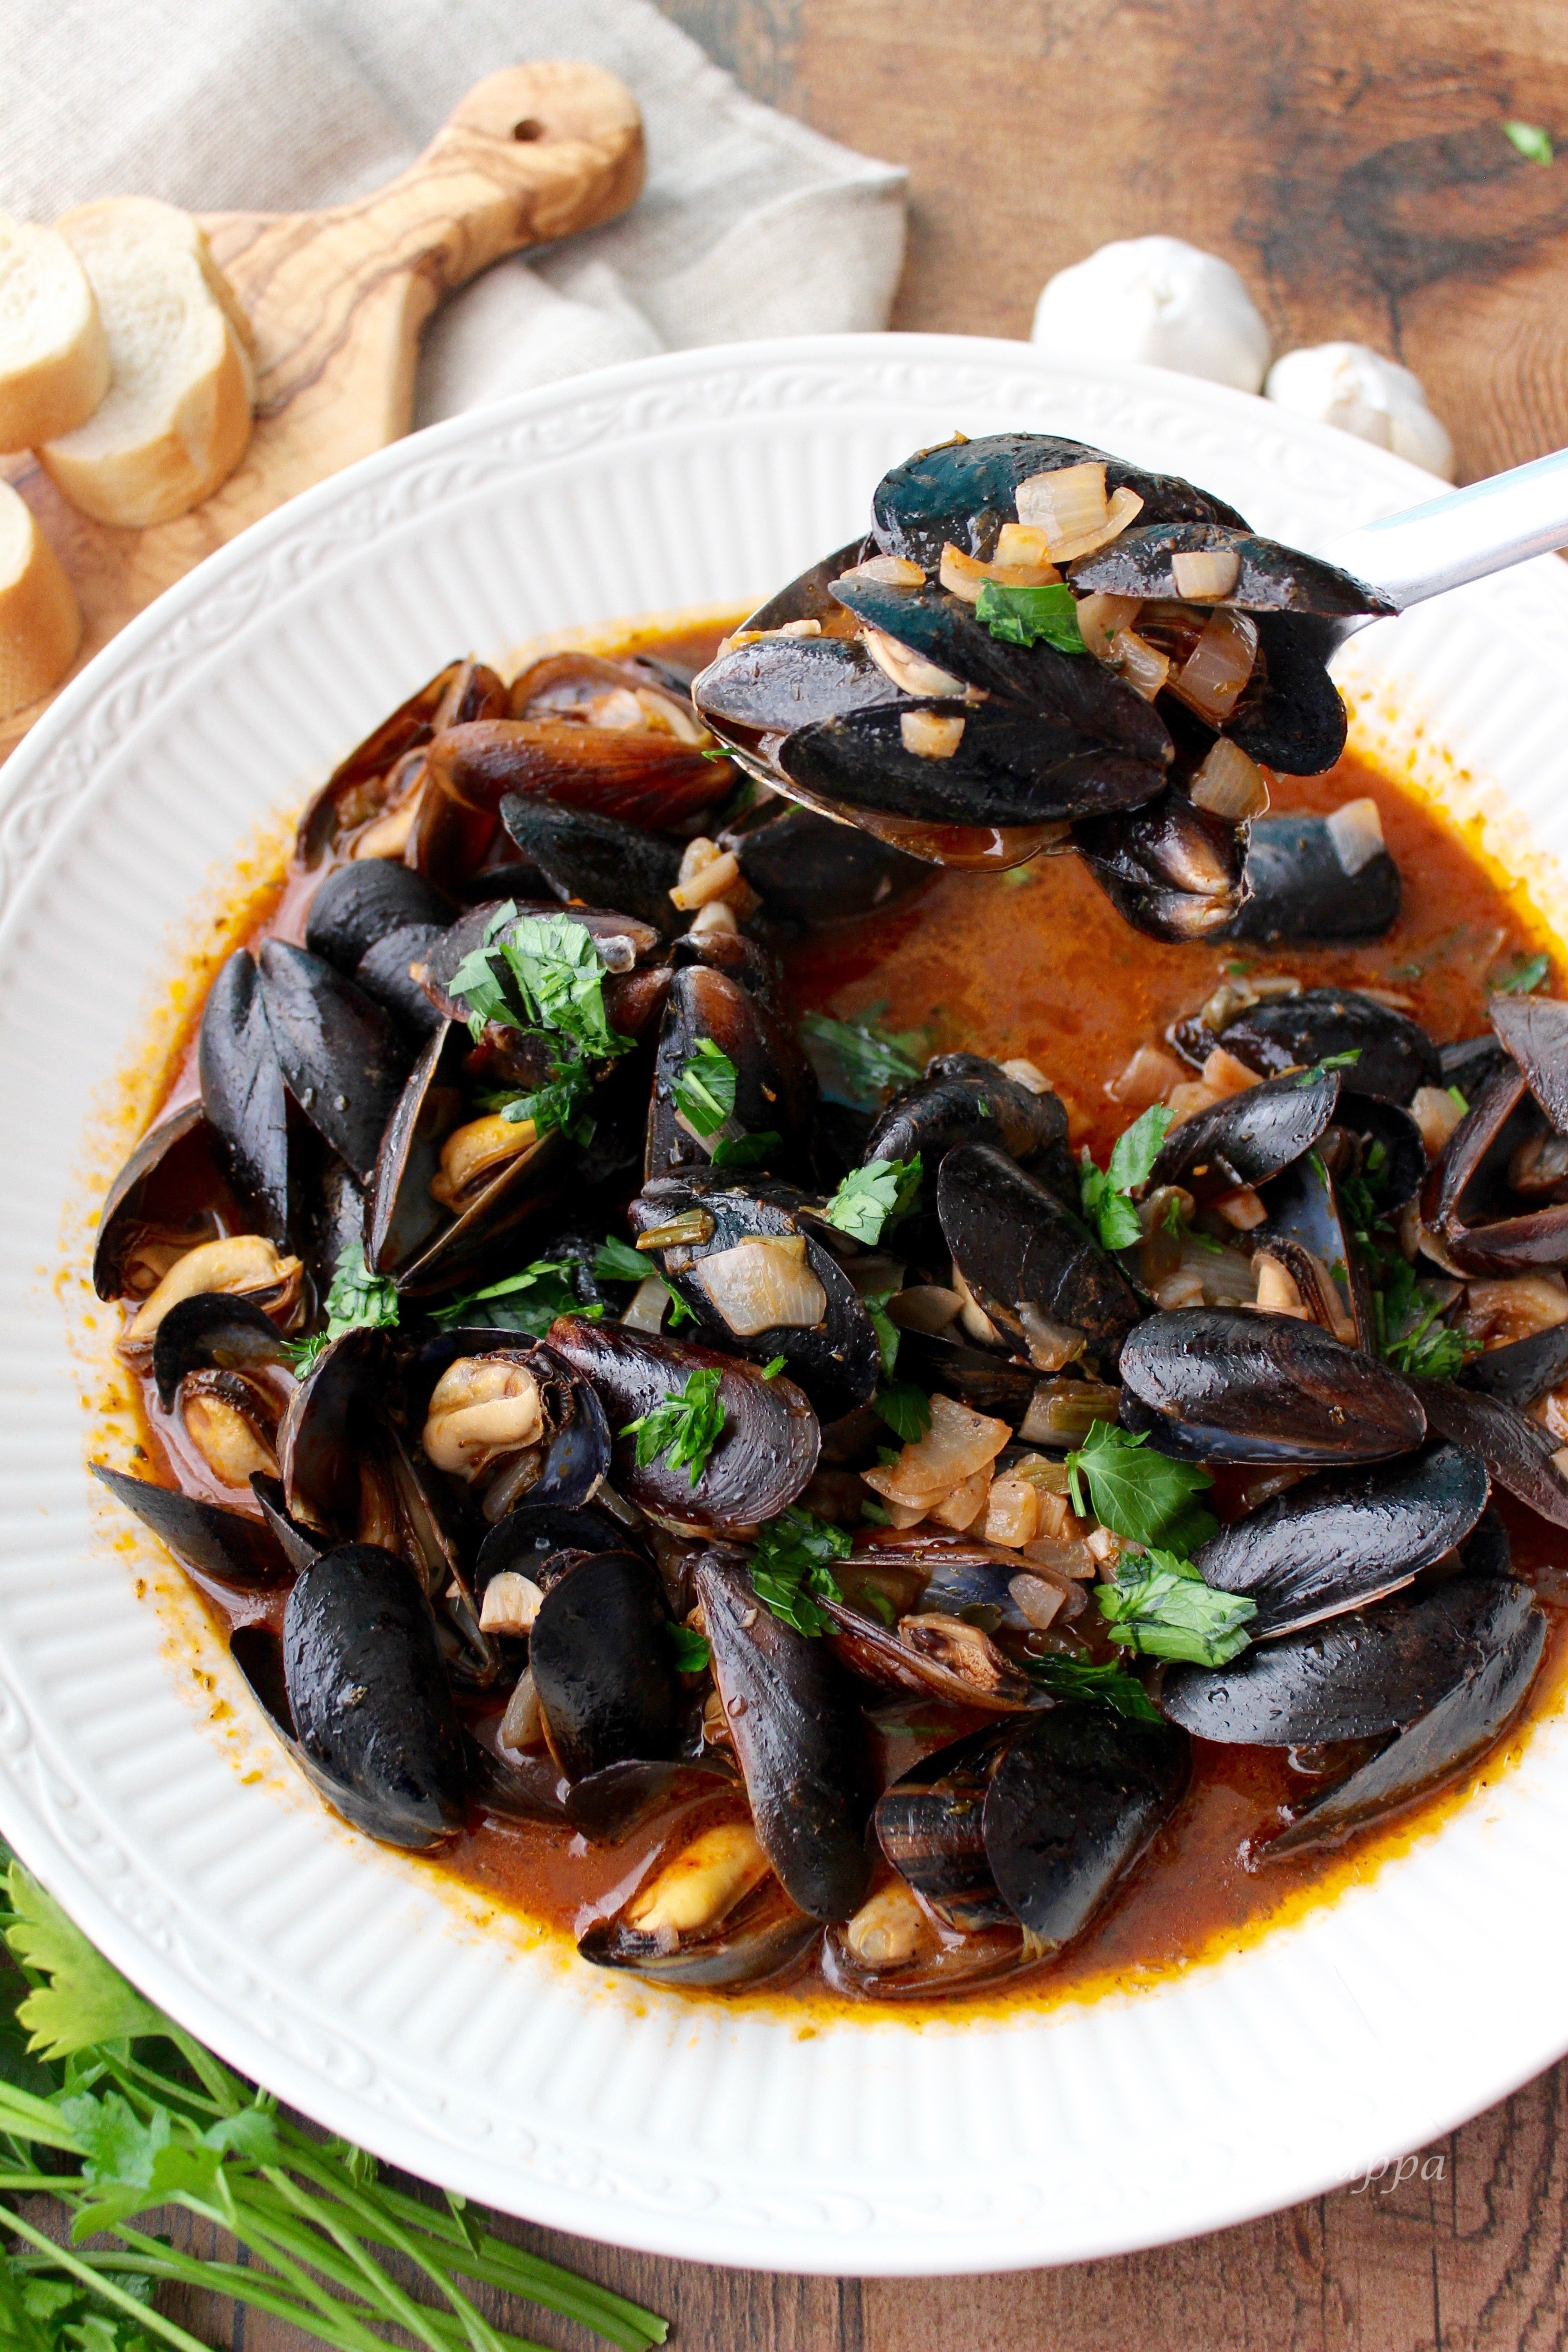 Mussels with red sauce (Μύδια με κόκκινη σάλτσα)